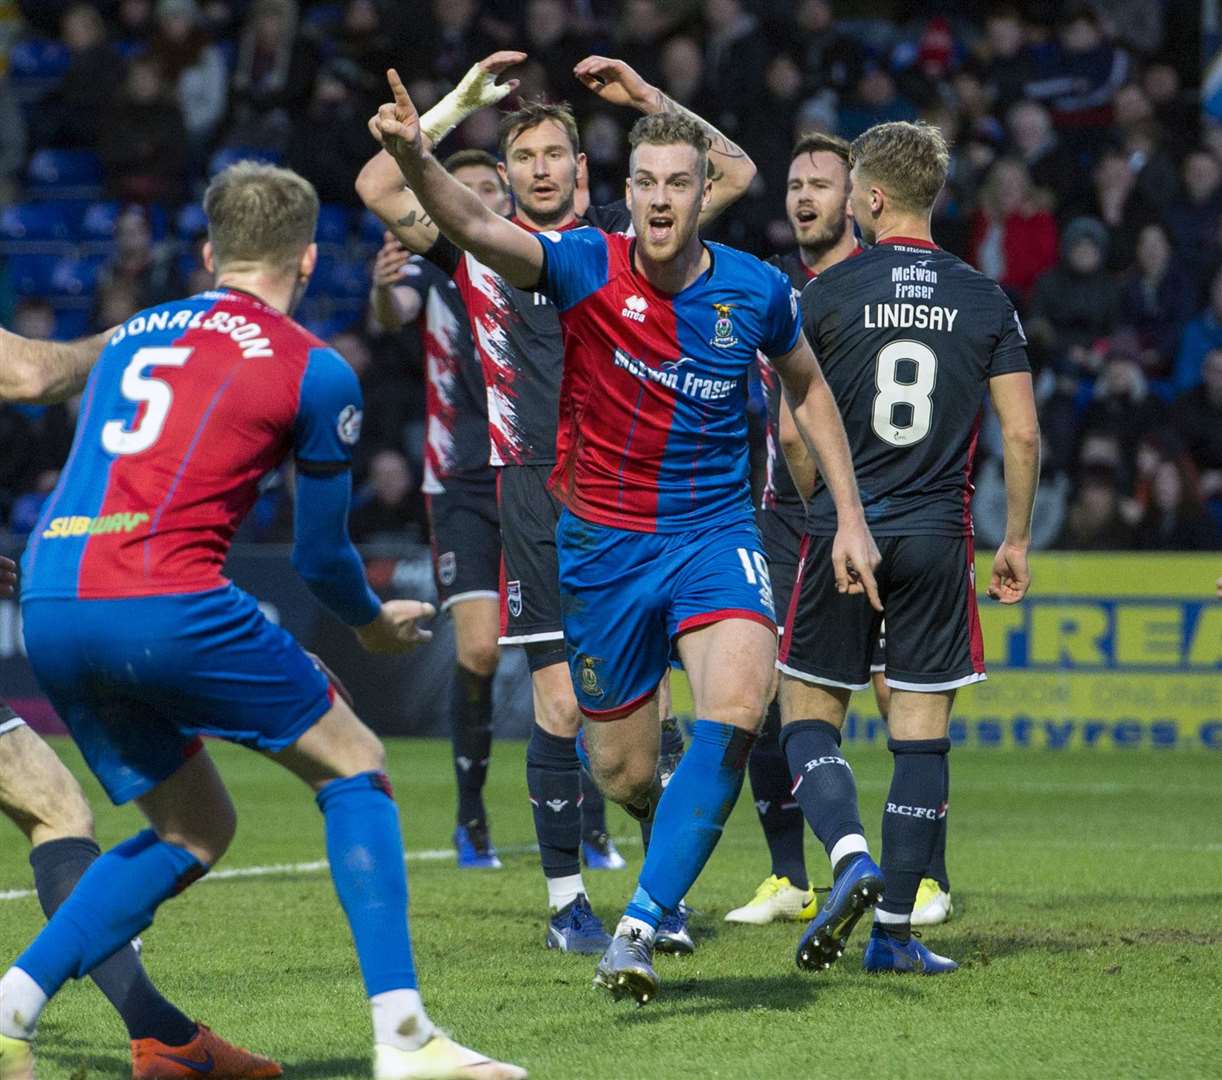 Inverness Caledonian Thistle received almost £242,000.